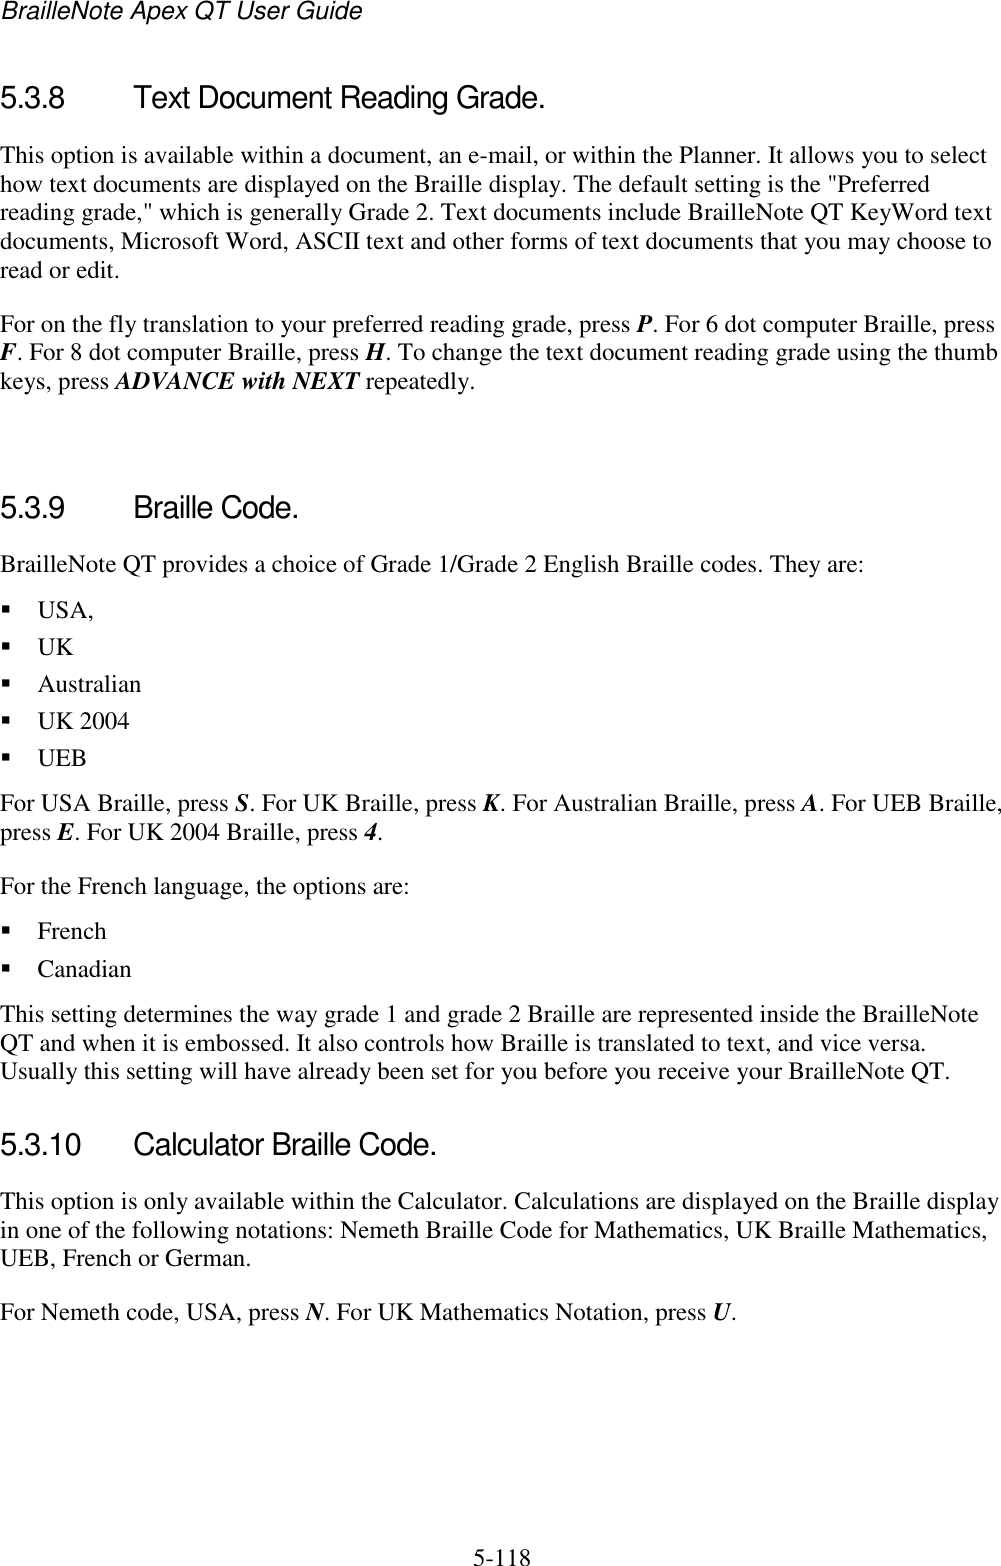 BrailleNote Apex QT User Guide  5-118   5.3.8  Text Document Reading Grade. This option is available within a document, an e-mail, or within the Planner. It allows you to select how text documents are displayed on the Braille display. The default setting is the &quot;Preferred reading grade,&quot; which is generally Grade 2. Text documents include BrailleNote QT KeyWord text documents, Microsoft Word, ASCII text and other forms of text documents that you may choose to read or edit. For on the fly translation to your preferred reading grade, press P. For 6 dot computer Braille, press F. For 8 dot computer Braille, press H. To change the text document reading grade using the thumb keys, press ADVANCE with NEXT repeatedly.   5.3.9  Braille Code. BrailleNote QT provides a choice of Grade 1/Grade 2 English Braille codes. They are:  USA,   UK   Australian  UK 2004  UEB For USA Braille, press S. For UK Braille, press K. For Australian Braille, press A. For UEB Braille, press E. For UK 2004 Braille, press 4. For the French language, the options are:  French  Canadian This setting determines the way grade 1 and grade 2 Braille are represented inside the BrailleNote QT and when it is embossed. It also controls how Braille is translated to text, and vice versa. Usually this setting will have already been set for you before you receive your BrailleNote QT.   5.3.10  Calculator Braille Code. This option is only available within the Calculator. Calculations are displayed on the Braille display in one of the following notations: Nemeth Braille Code for Mathematics, UK Braille Mathematics, UEB, French or German. For Nemeth code, USA, press N. For UK Mathematics Notation, press U.   